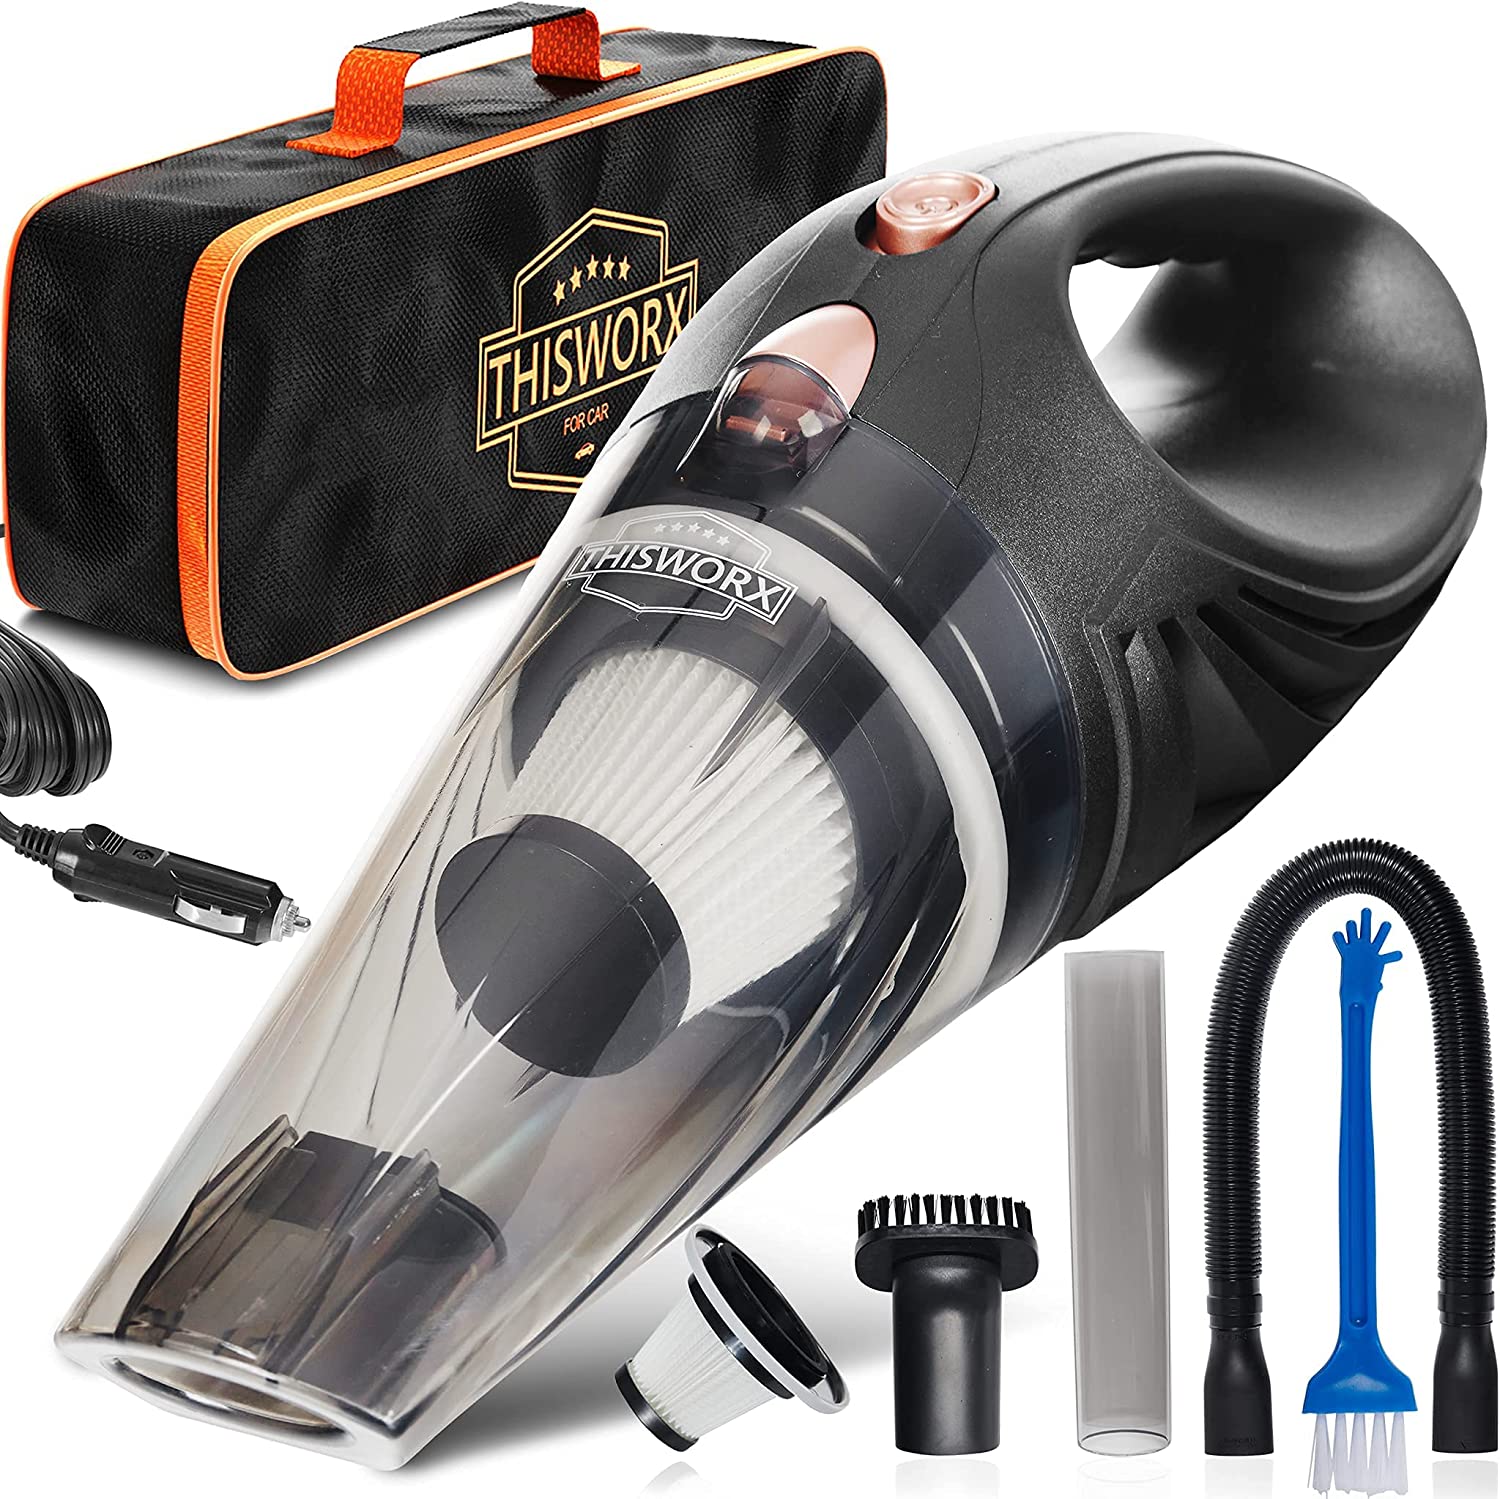 Brand new 180 ThisWorx Car Vacuum Cleaners - Portable, Lightweight, Powerful, Handheld Vacuums w/Strong Suction, 3 Attachment Accessories, Carry Case 